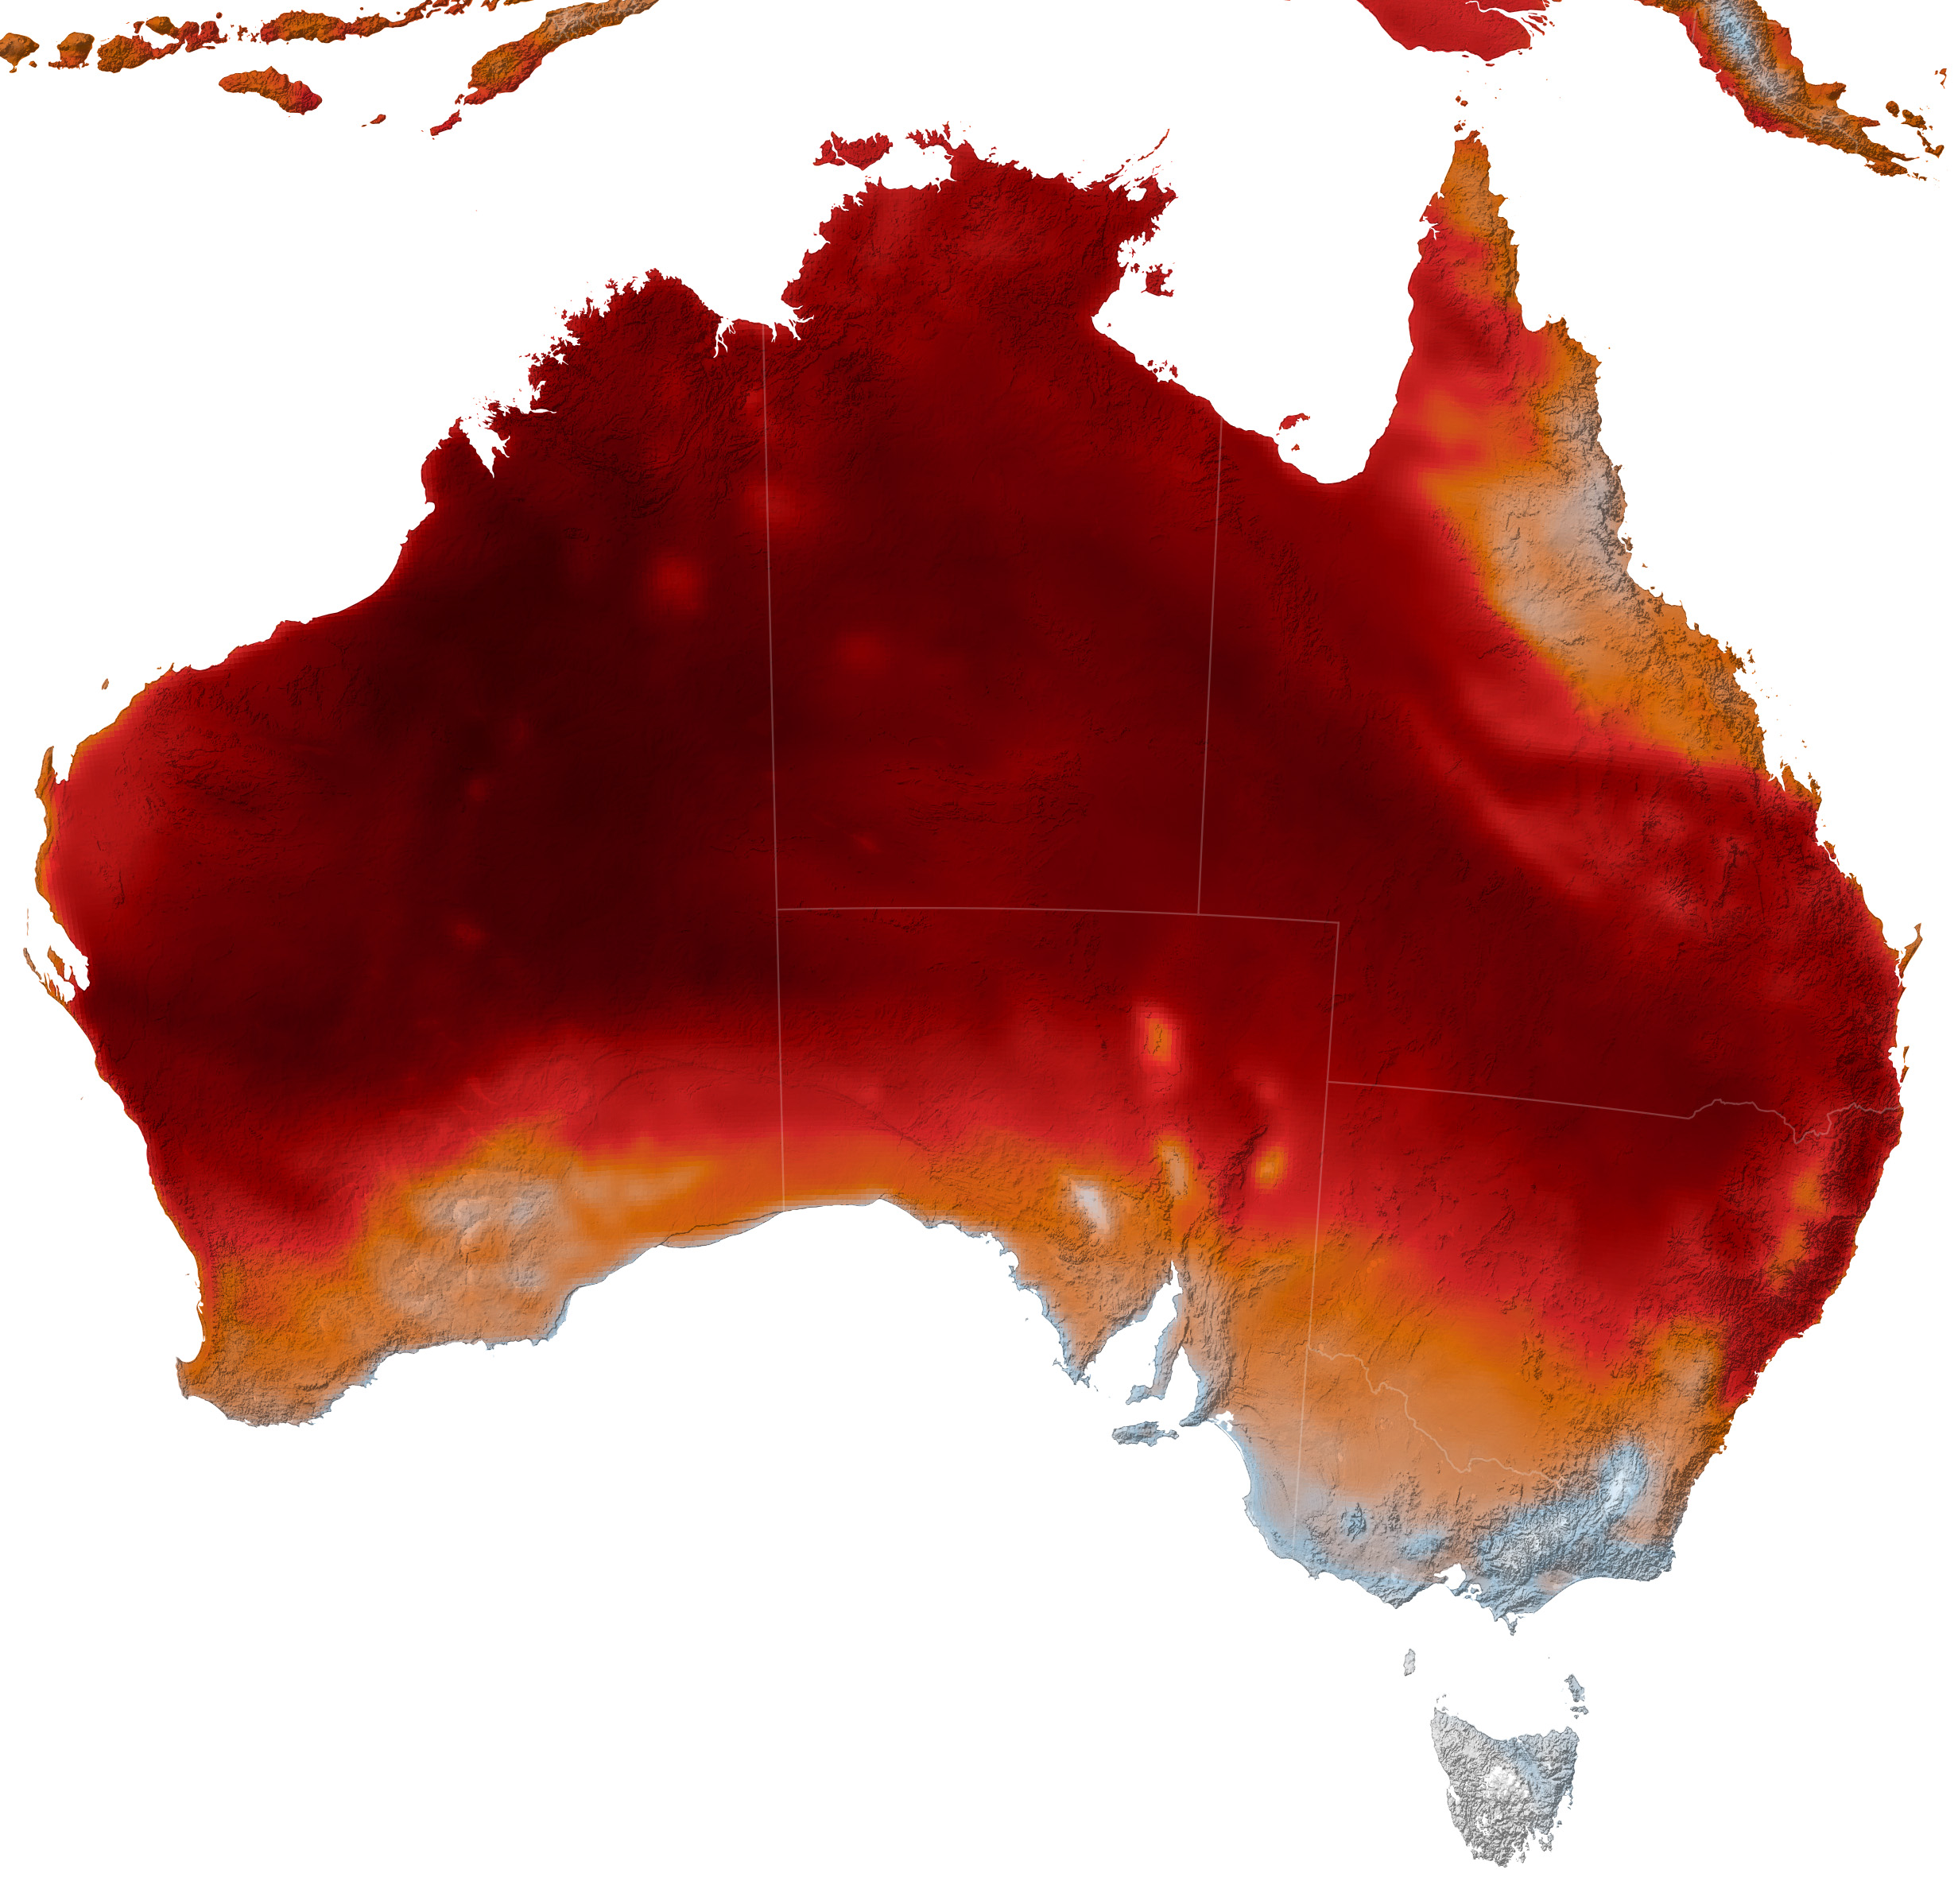 Heat Blankets Australia, Fuels Bushfires - related image preview